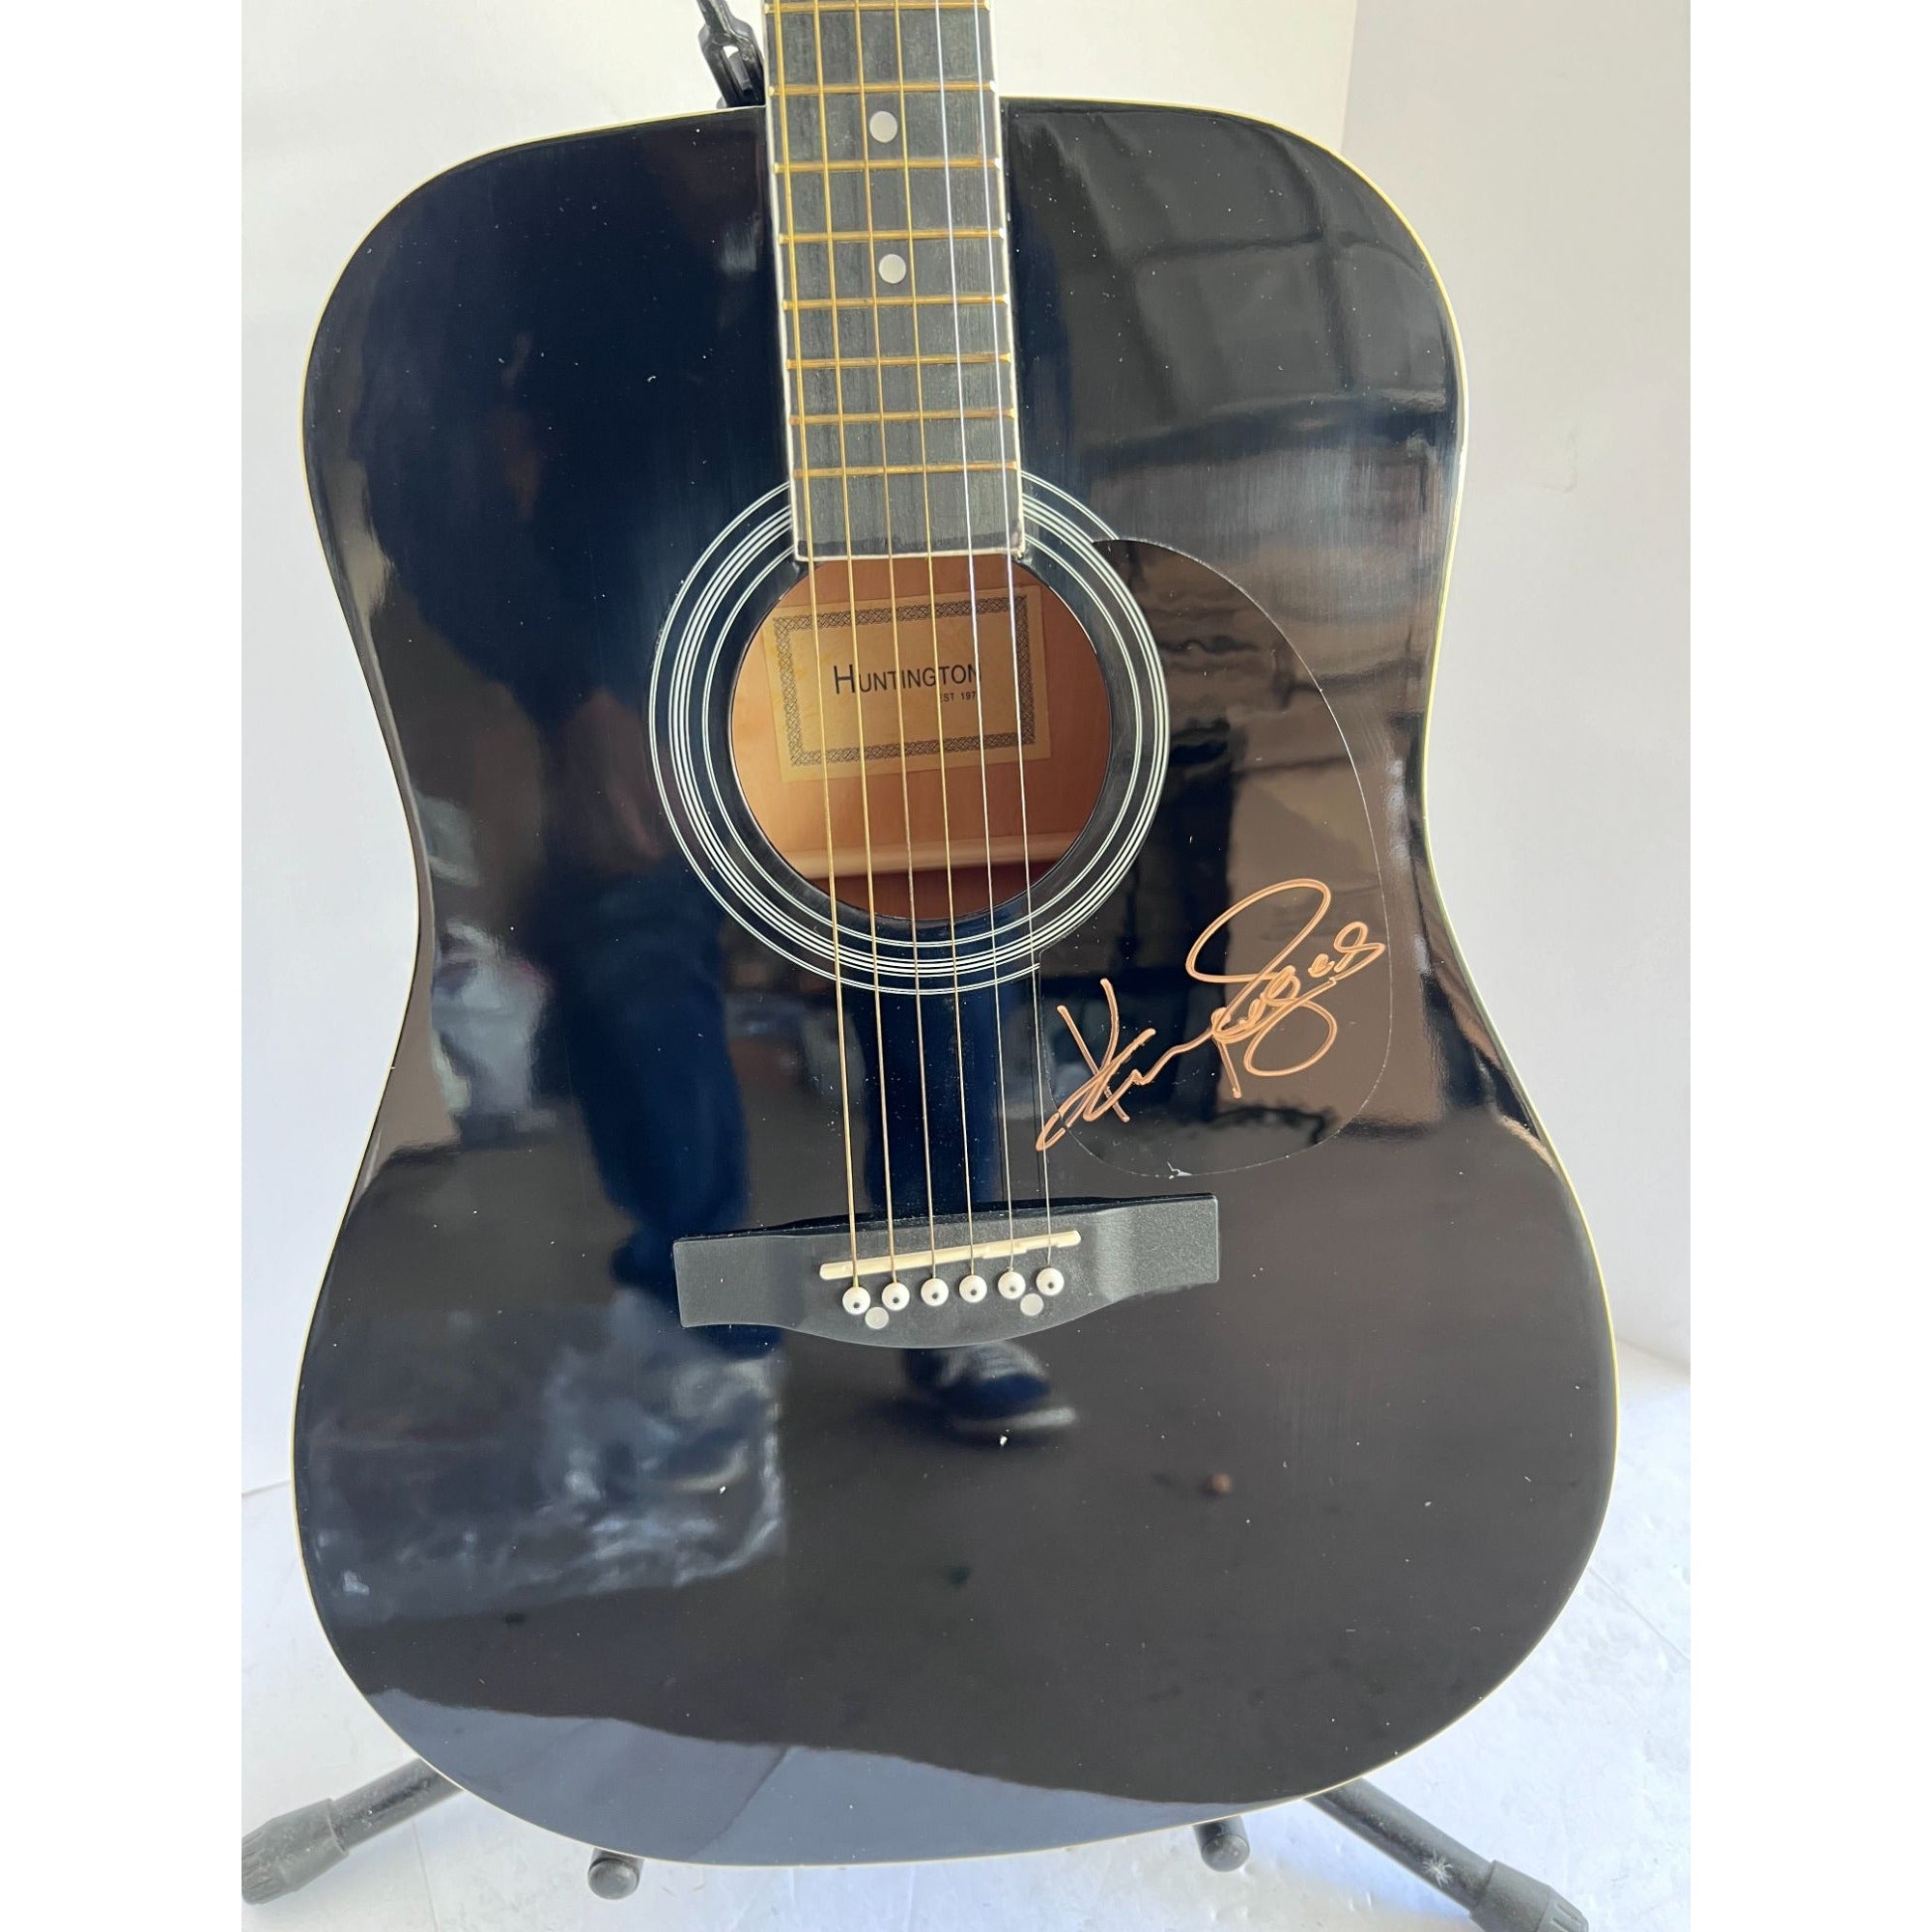 Kenny Rogers One of a Kind acoustic guitar signed with proof